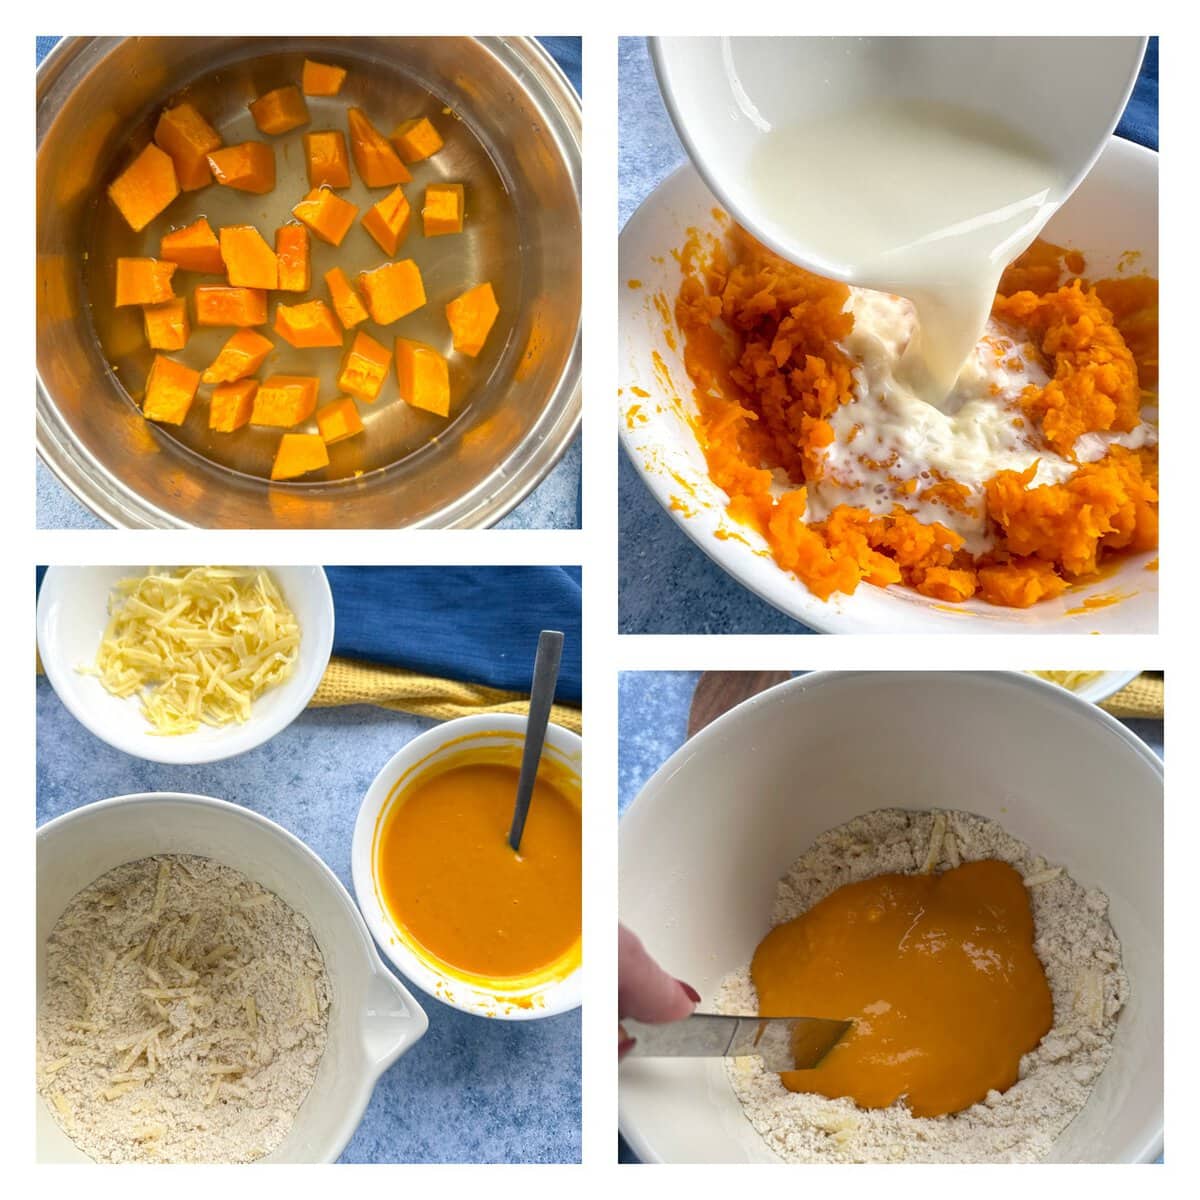 How to prepare the pumpkin puree for making pumpkin and cheese scones